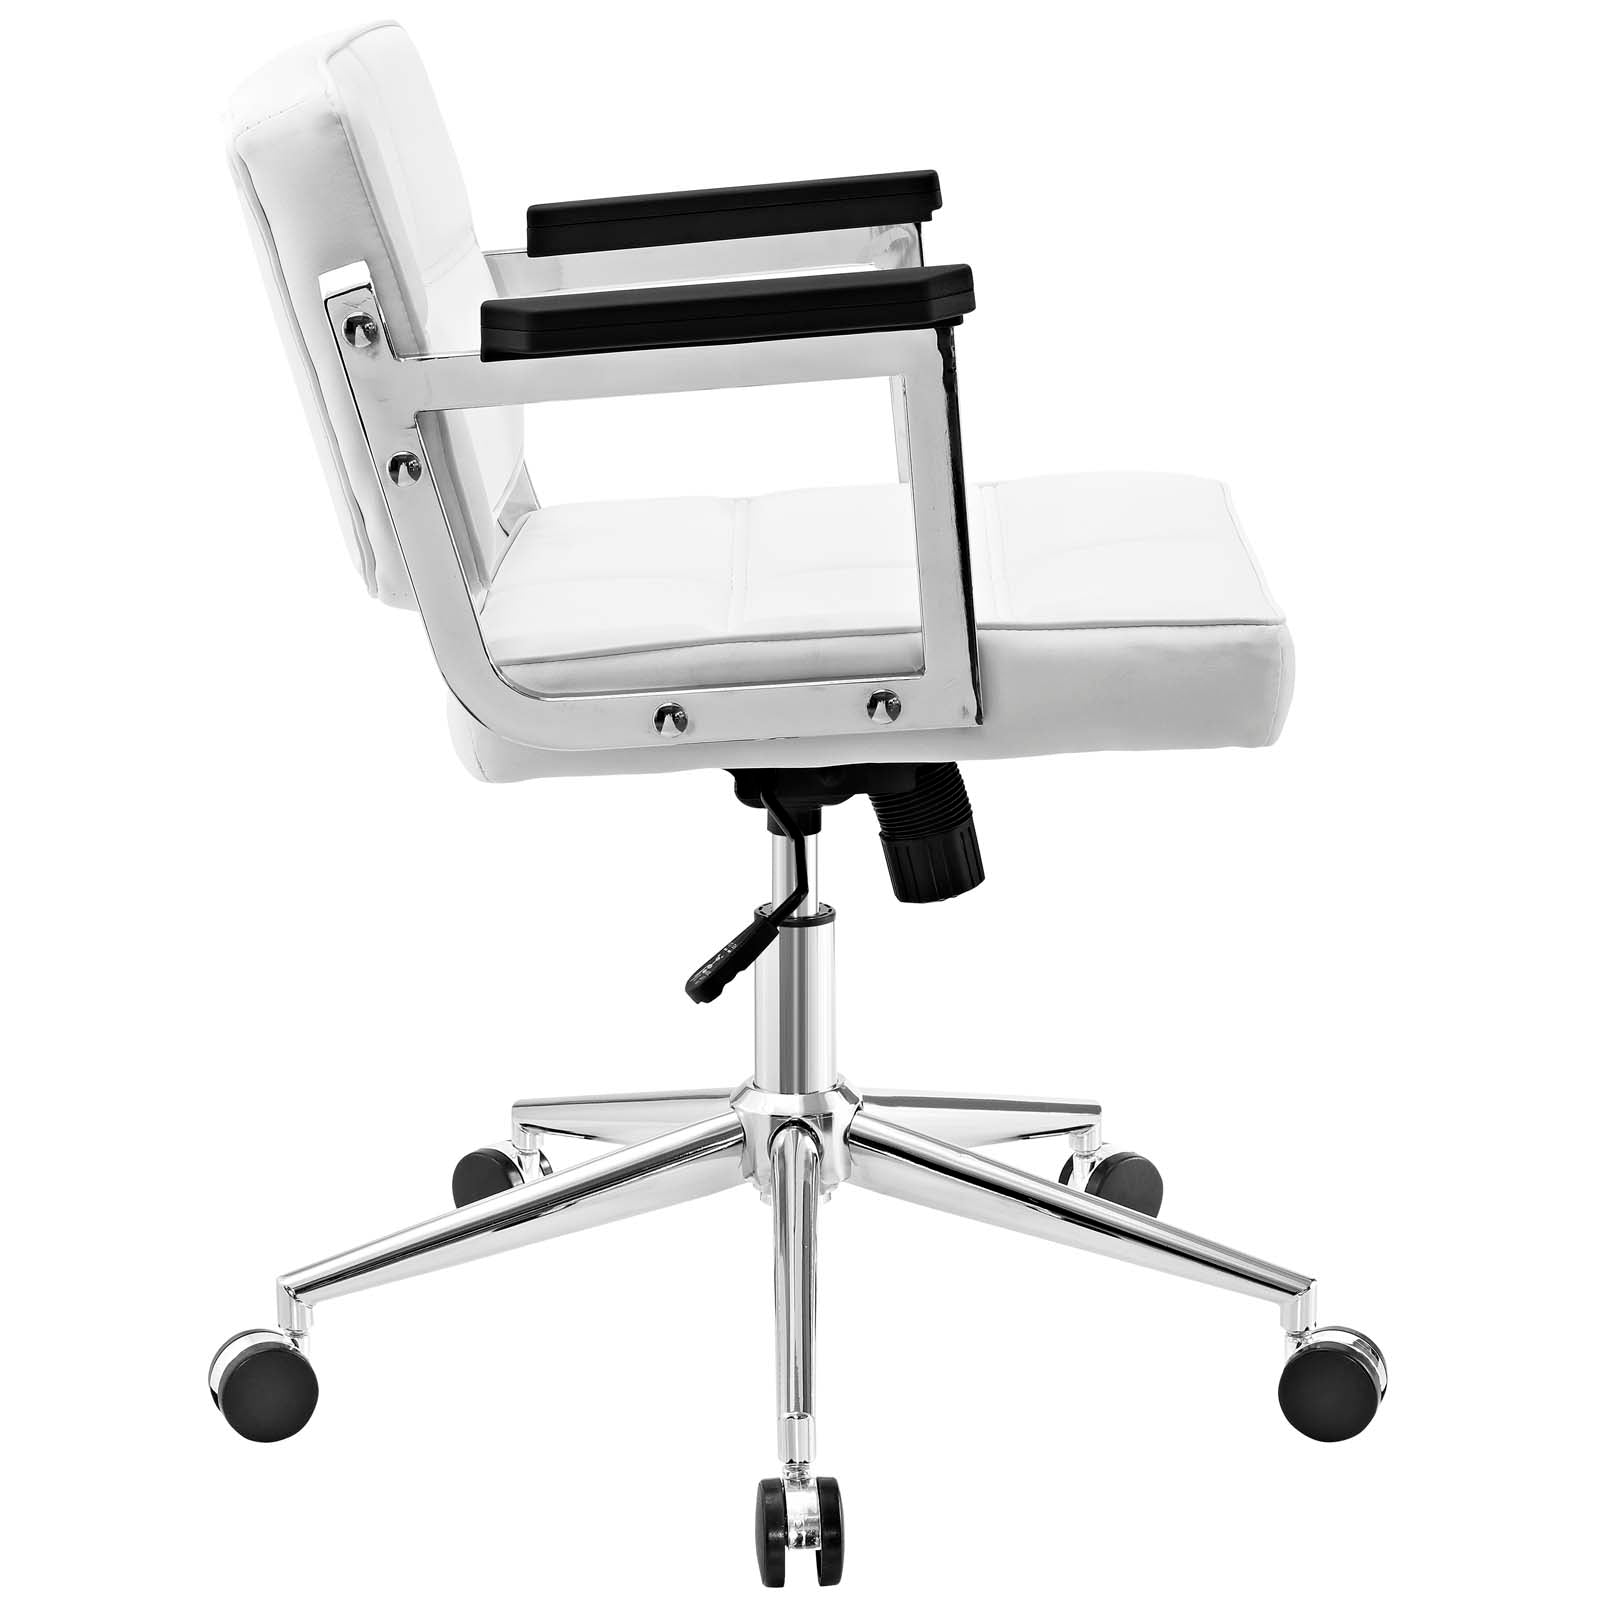 Modway Task Chairs - Portray Mid Back Upholstered Vinyl Office Chair White